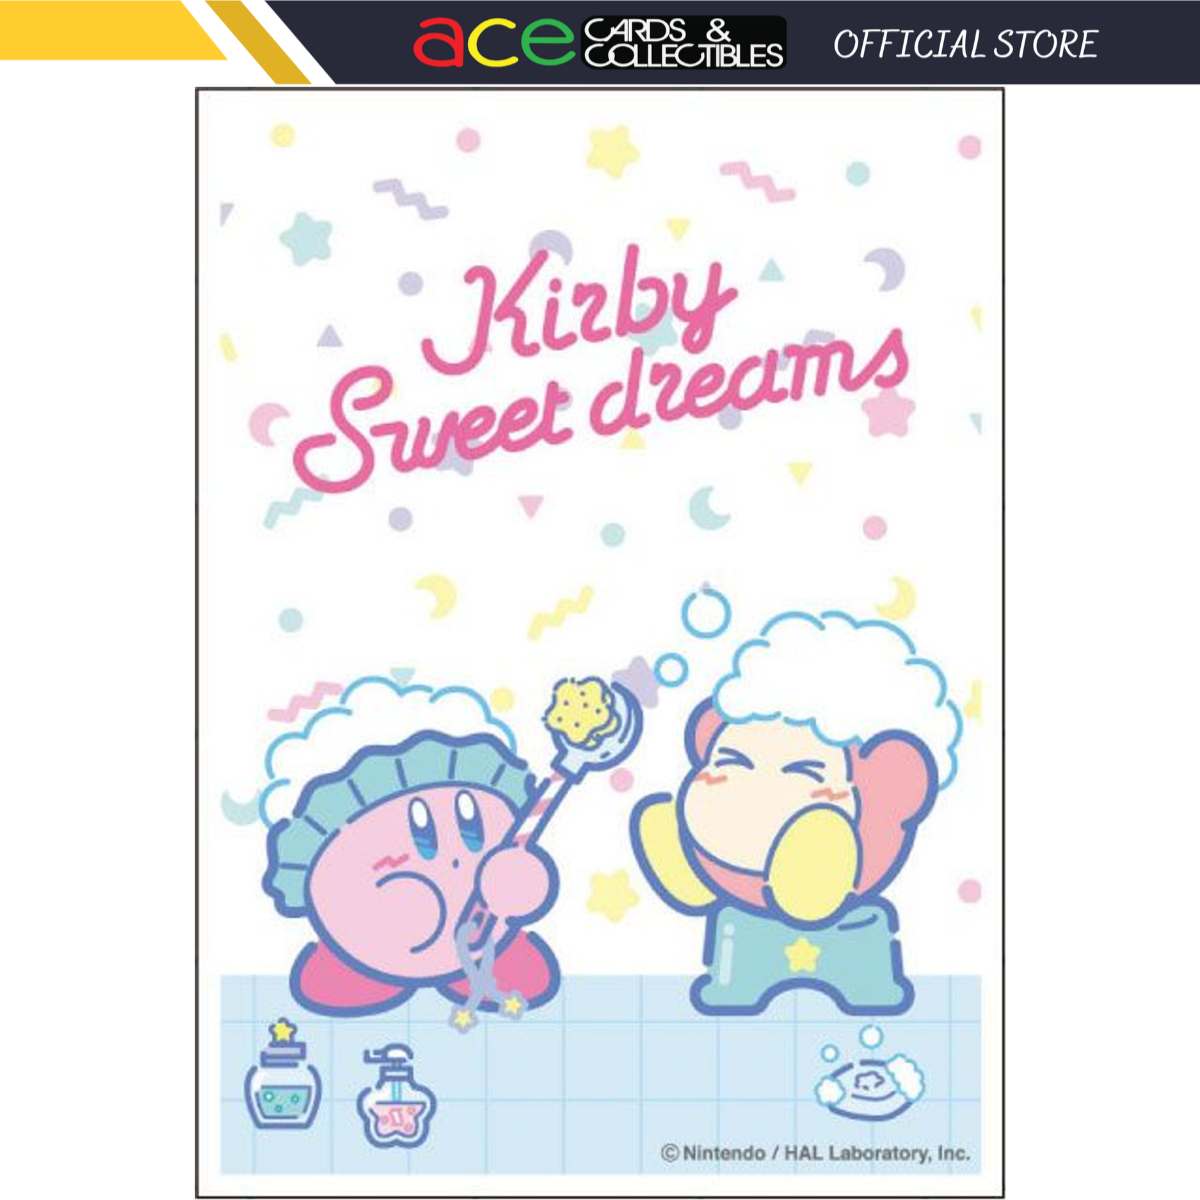 Ensky Character Sleeve - Kirby Horoscope "Awaawa Kirby & Waddle Dee" [EN-1220]-Ensky-Ace Cards & Collectibles